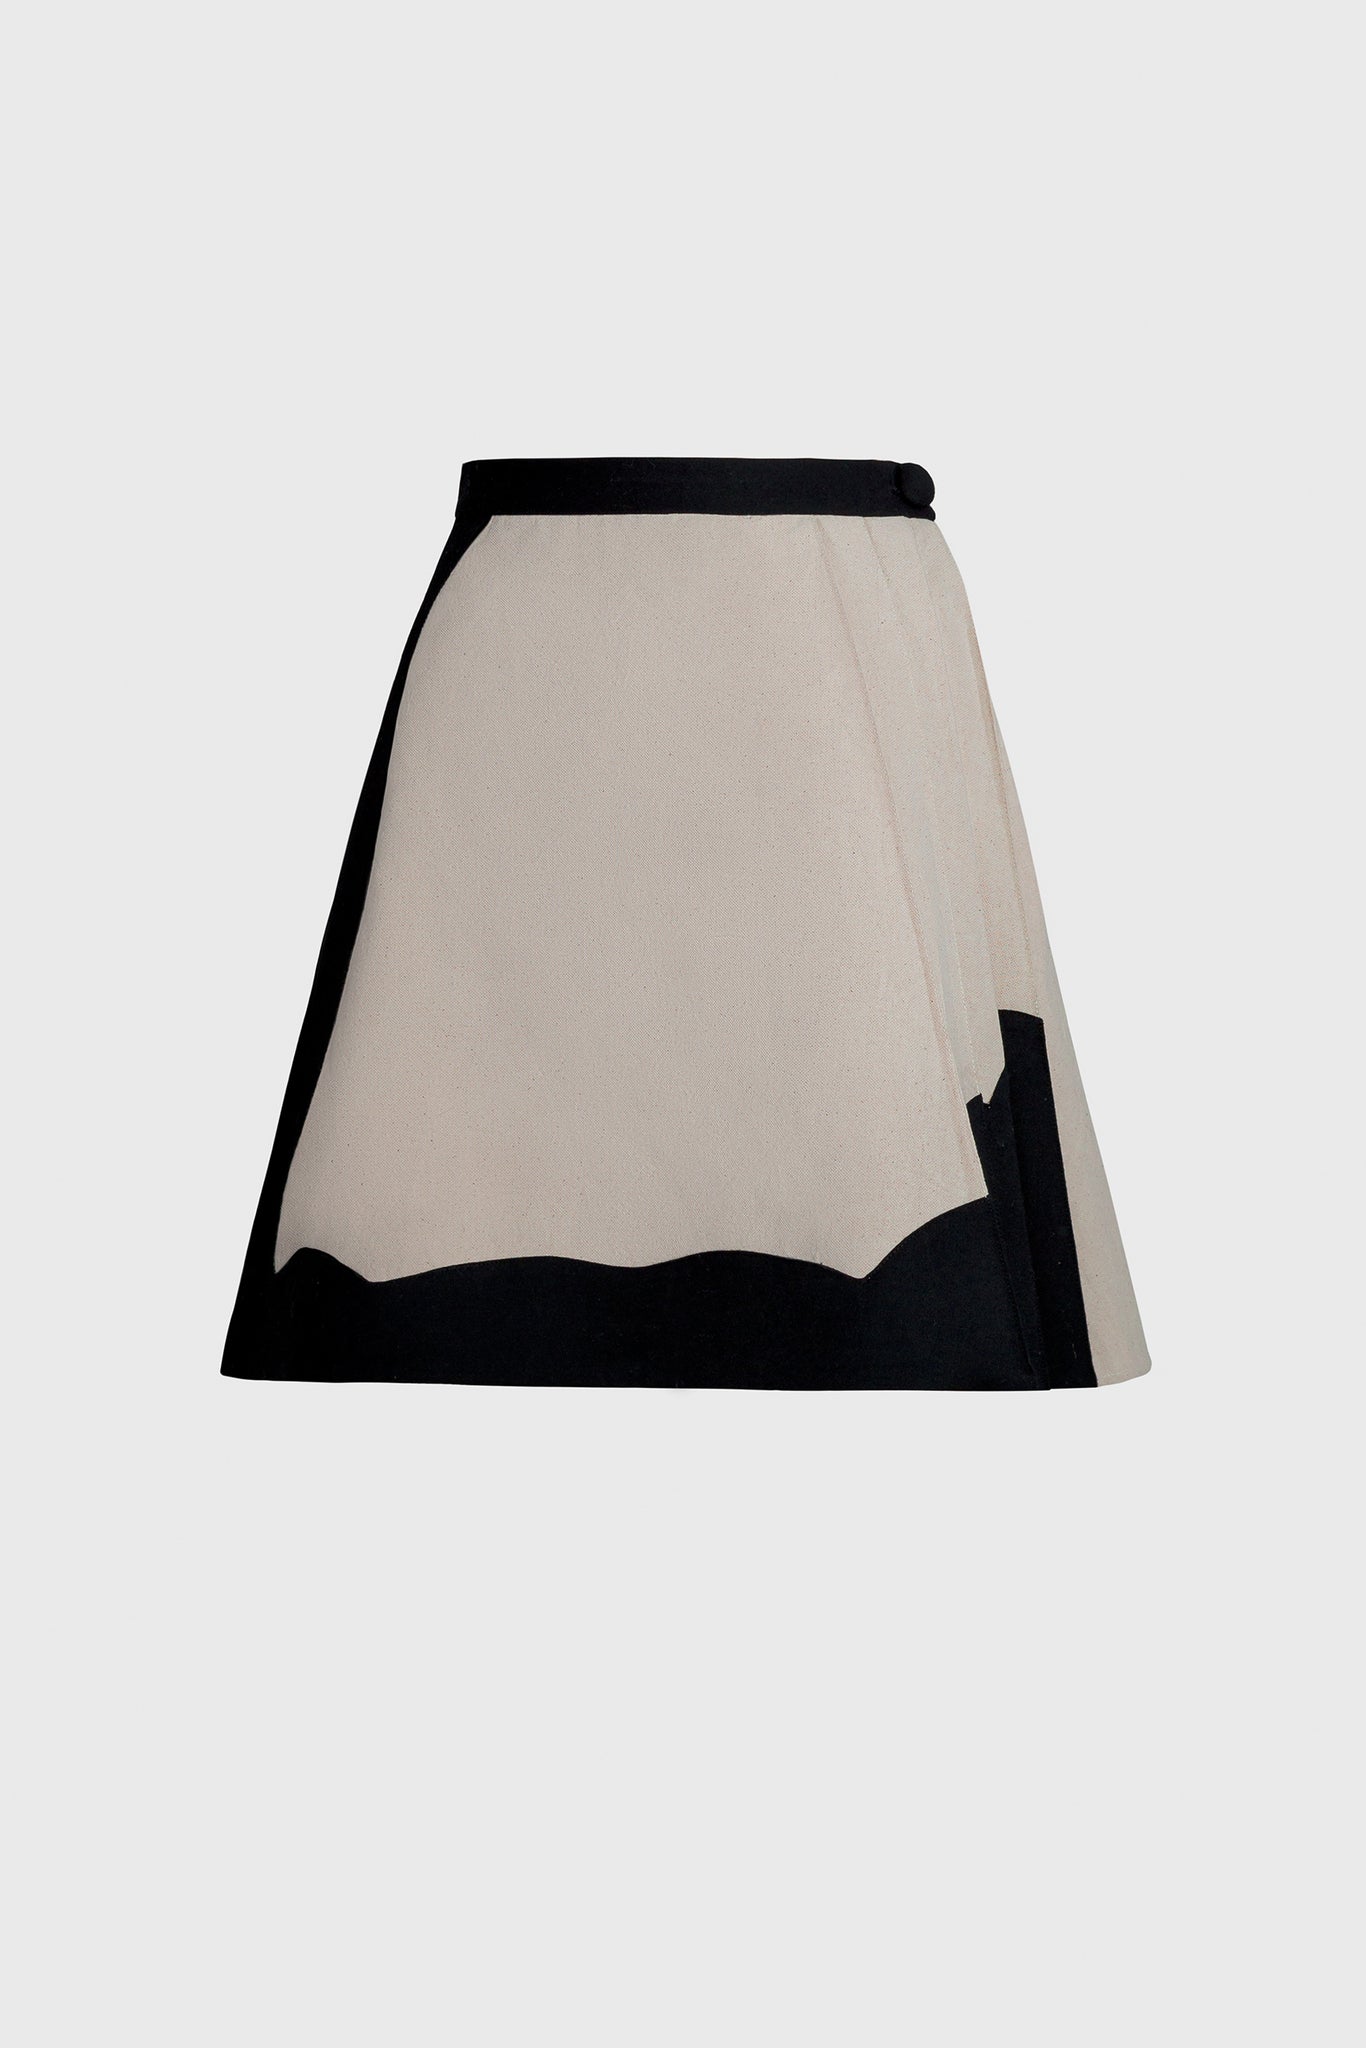 pretty skirt for pretty girls, pleats side, hidden zipper closure, matching covered button on the side, creative, for art students, architecture students, law students, for an elegant silhouette, Euforia style